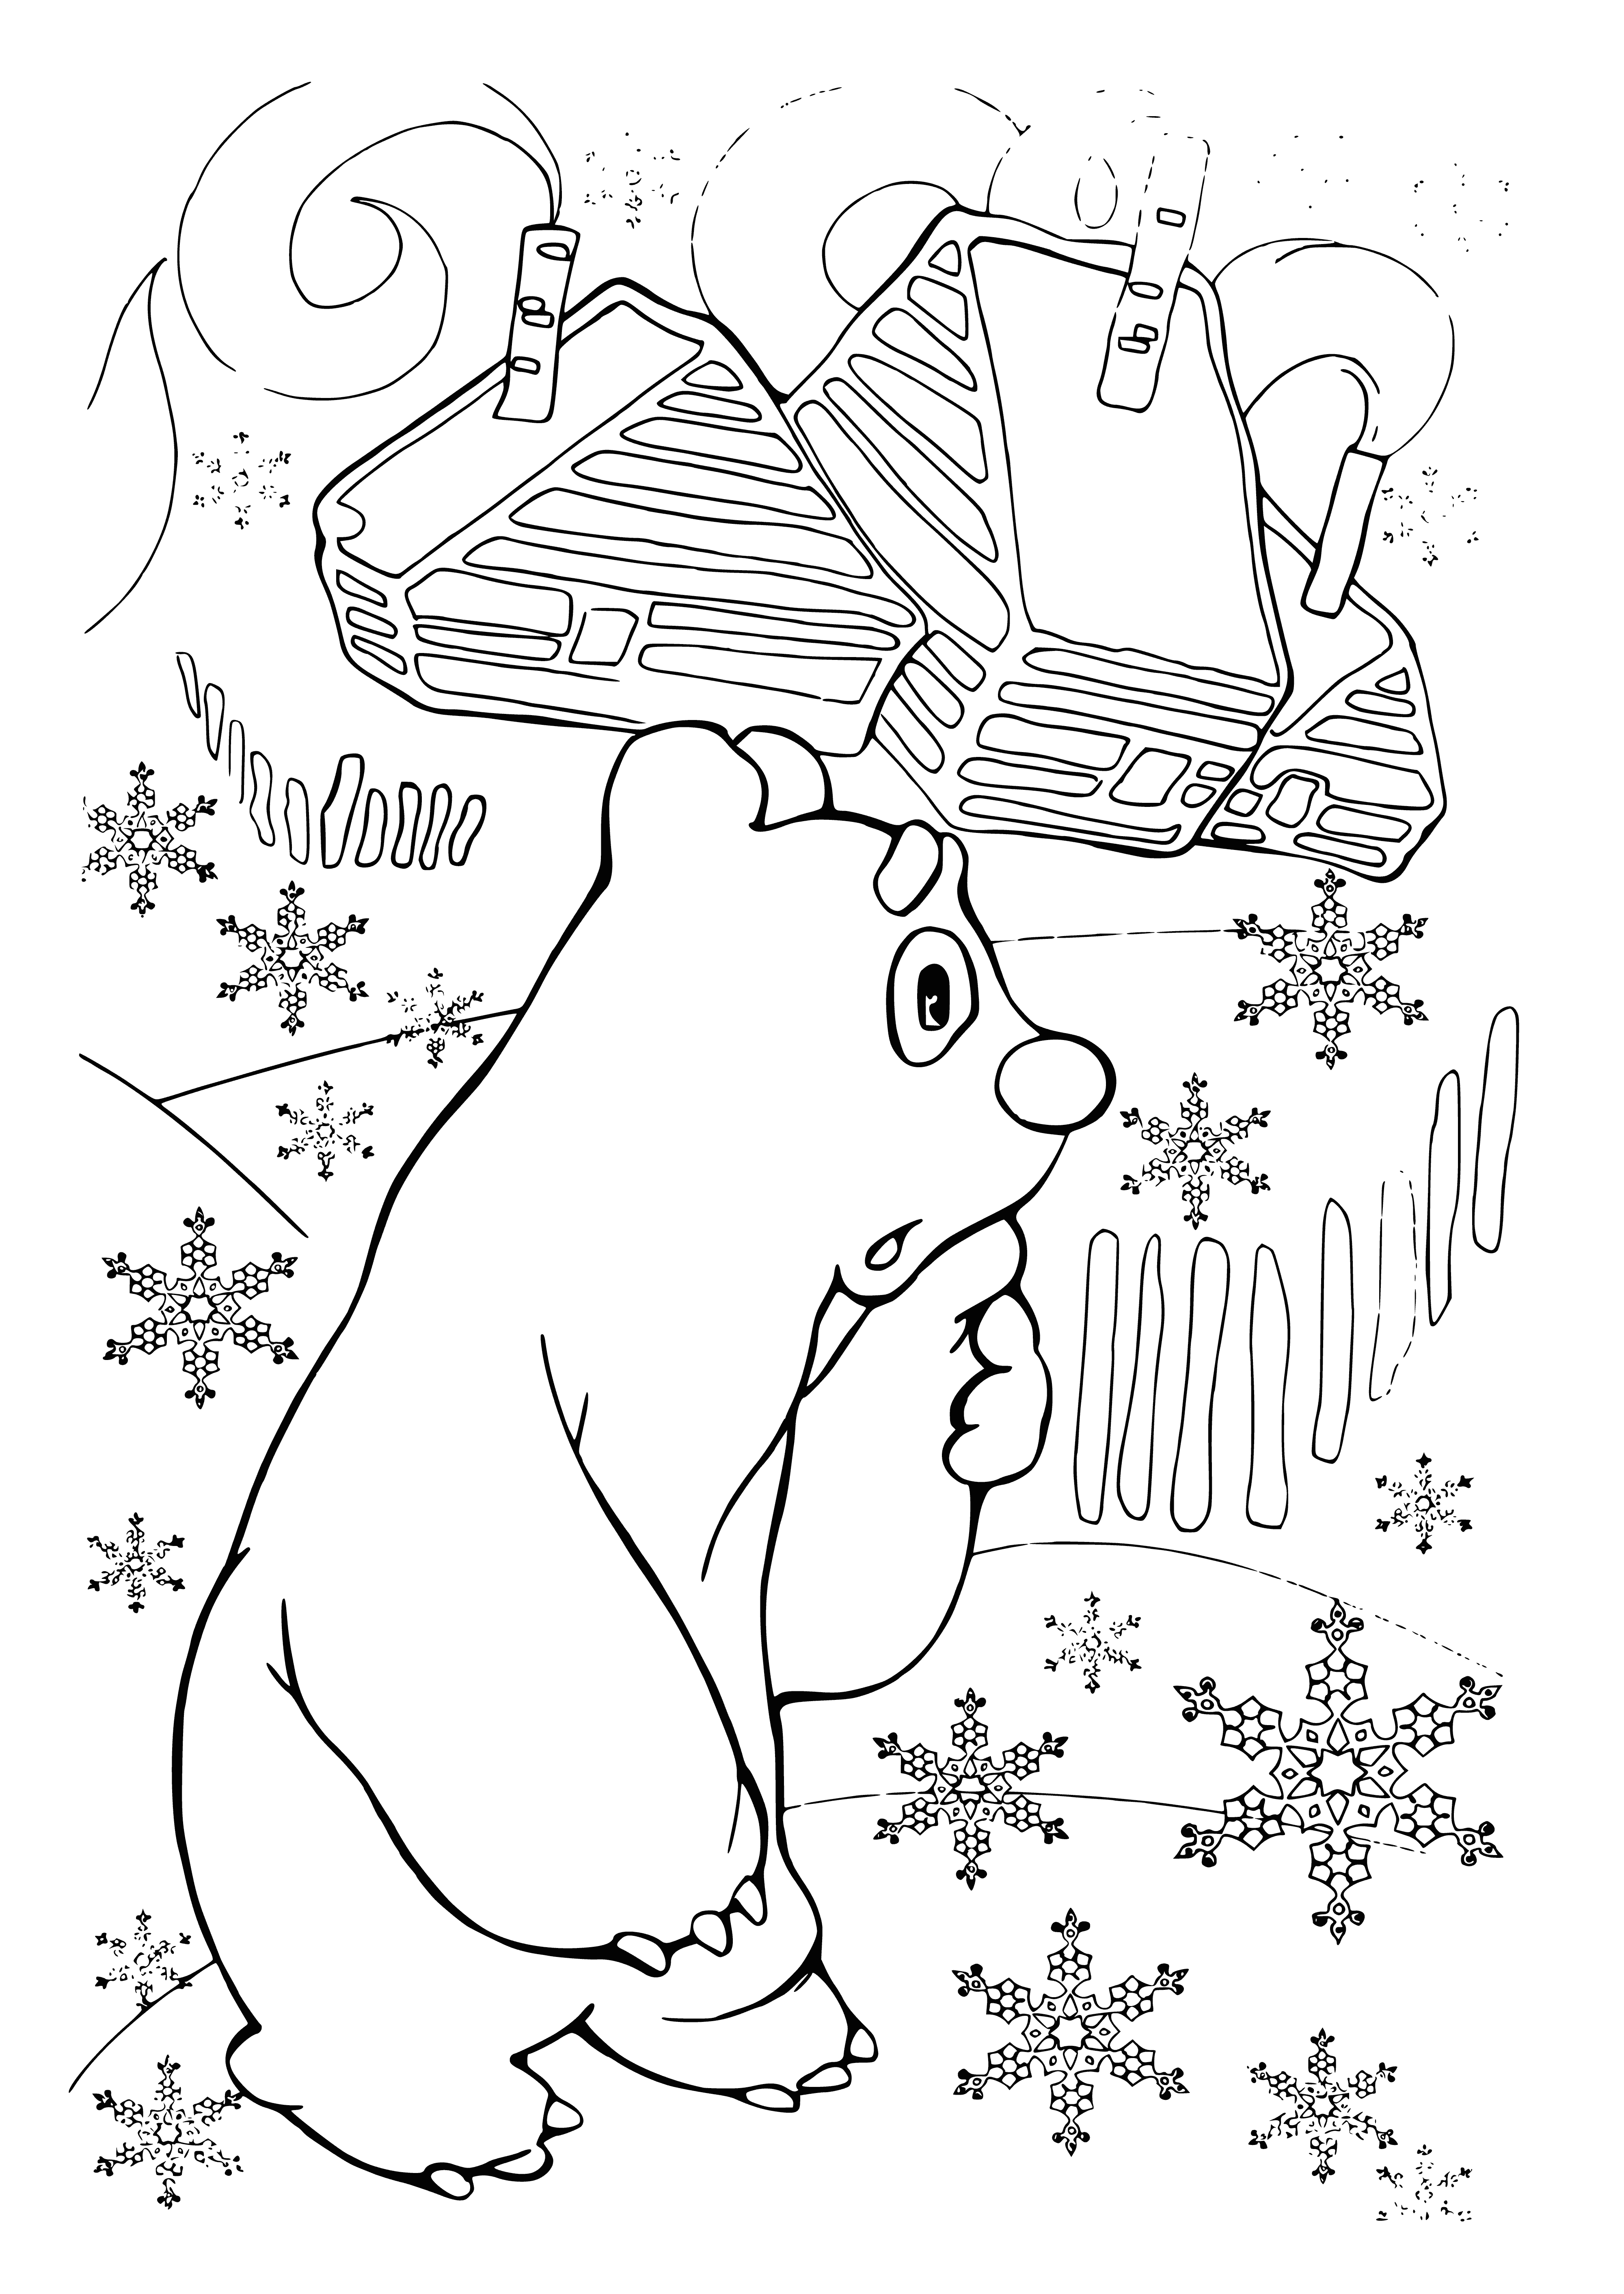 coloring page: A small white fluffy dog with blue eyes, wearing a red scarf, sits amidst evergreen trees in the snow.